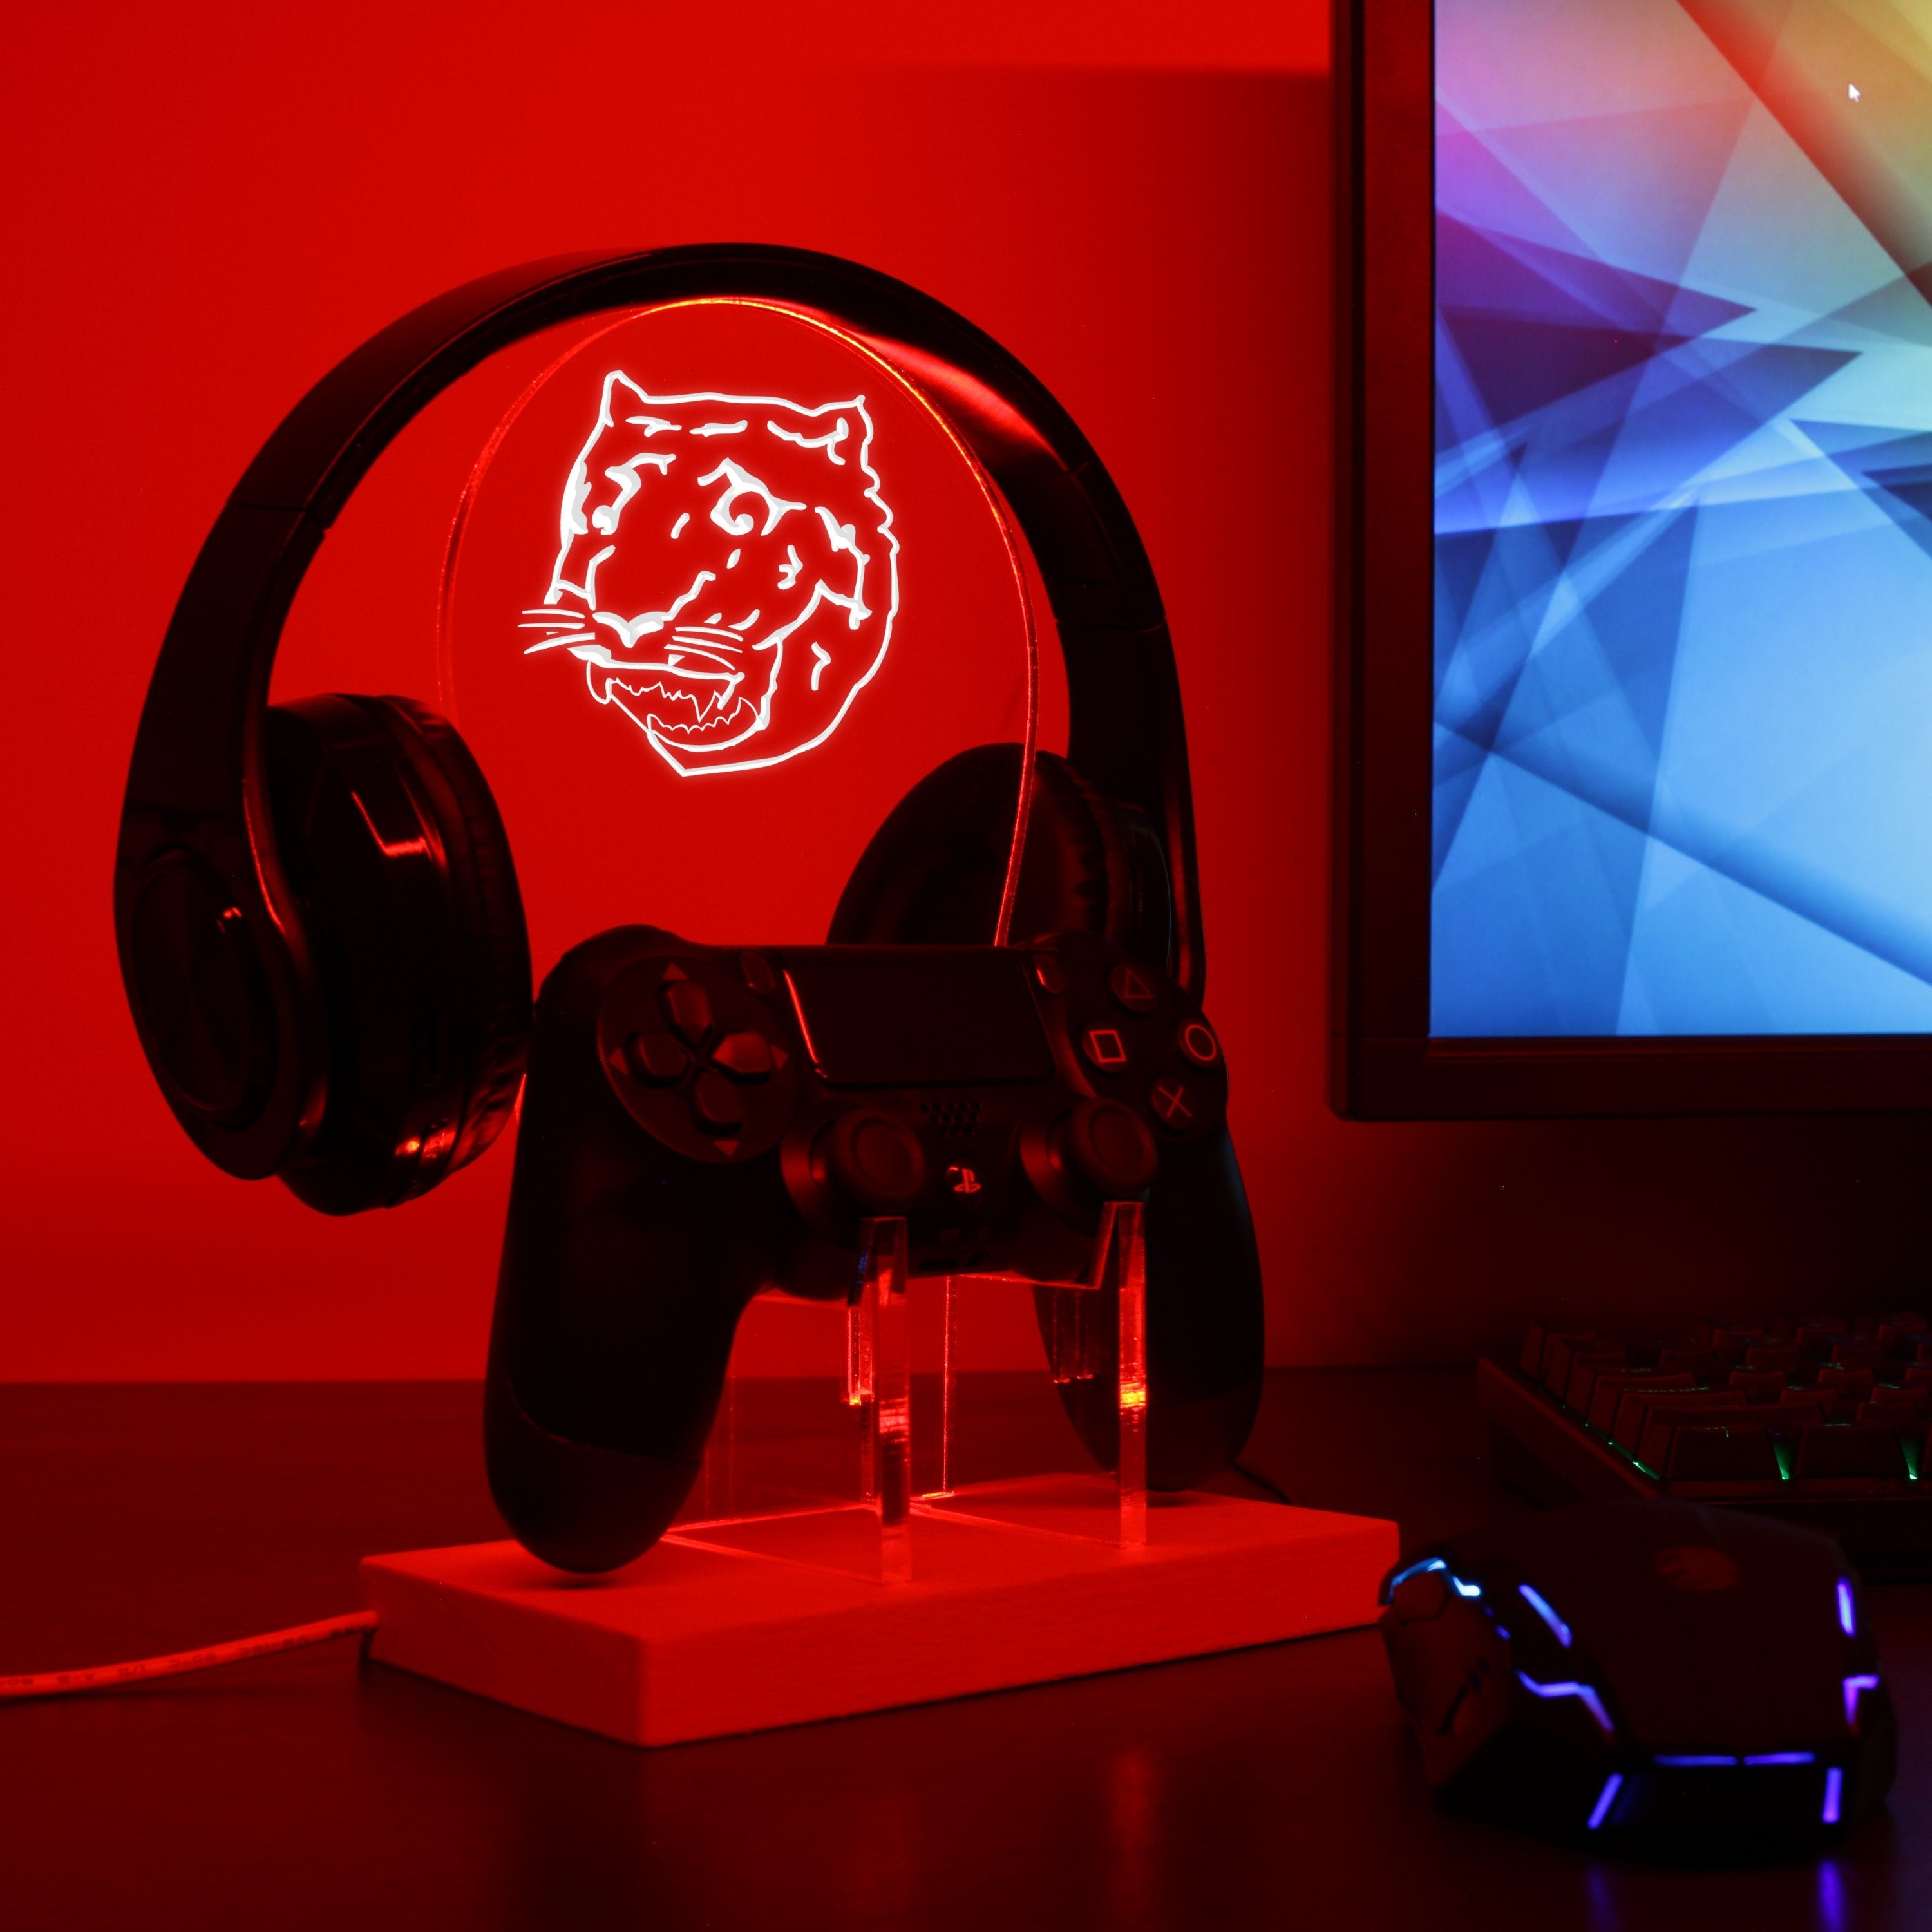 Detroit Tigers LED Gaming Headset Controller Stand